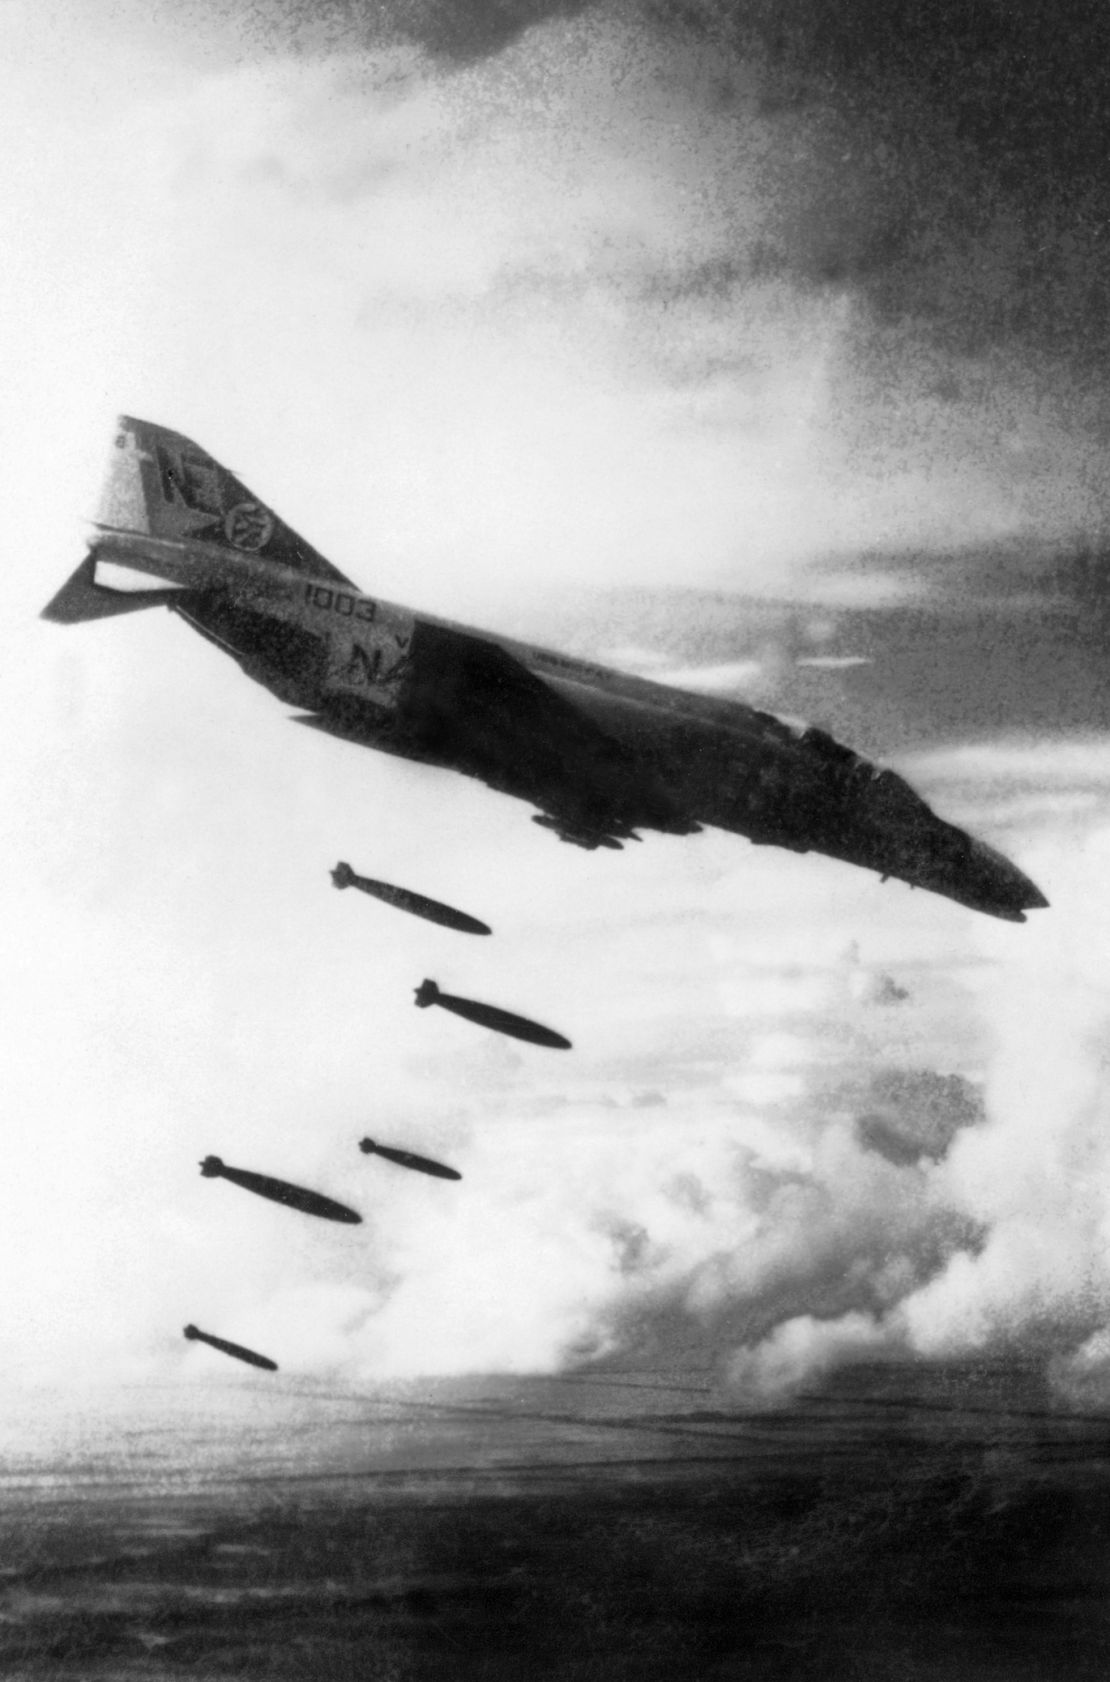 A U.S. F4 Phantom drops bombs over a Viet Cong controlled area in South Vietnam in November 1965 during the Vietnam War.